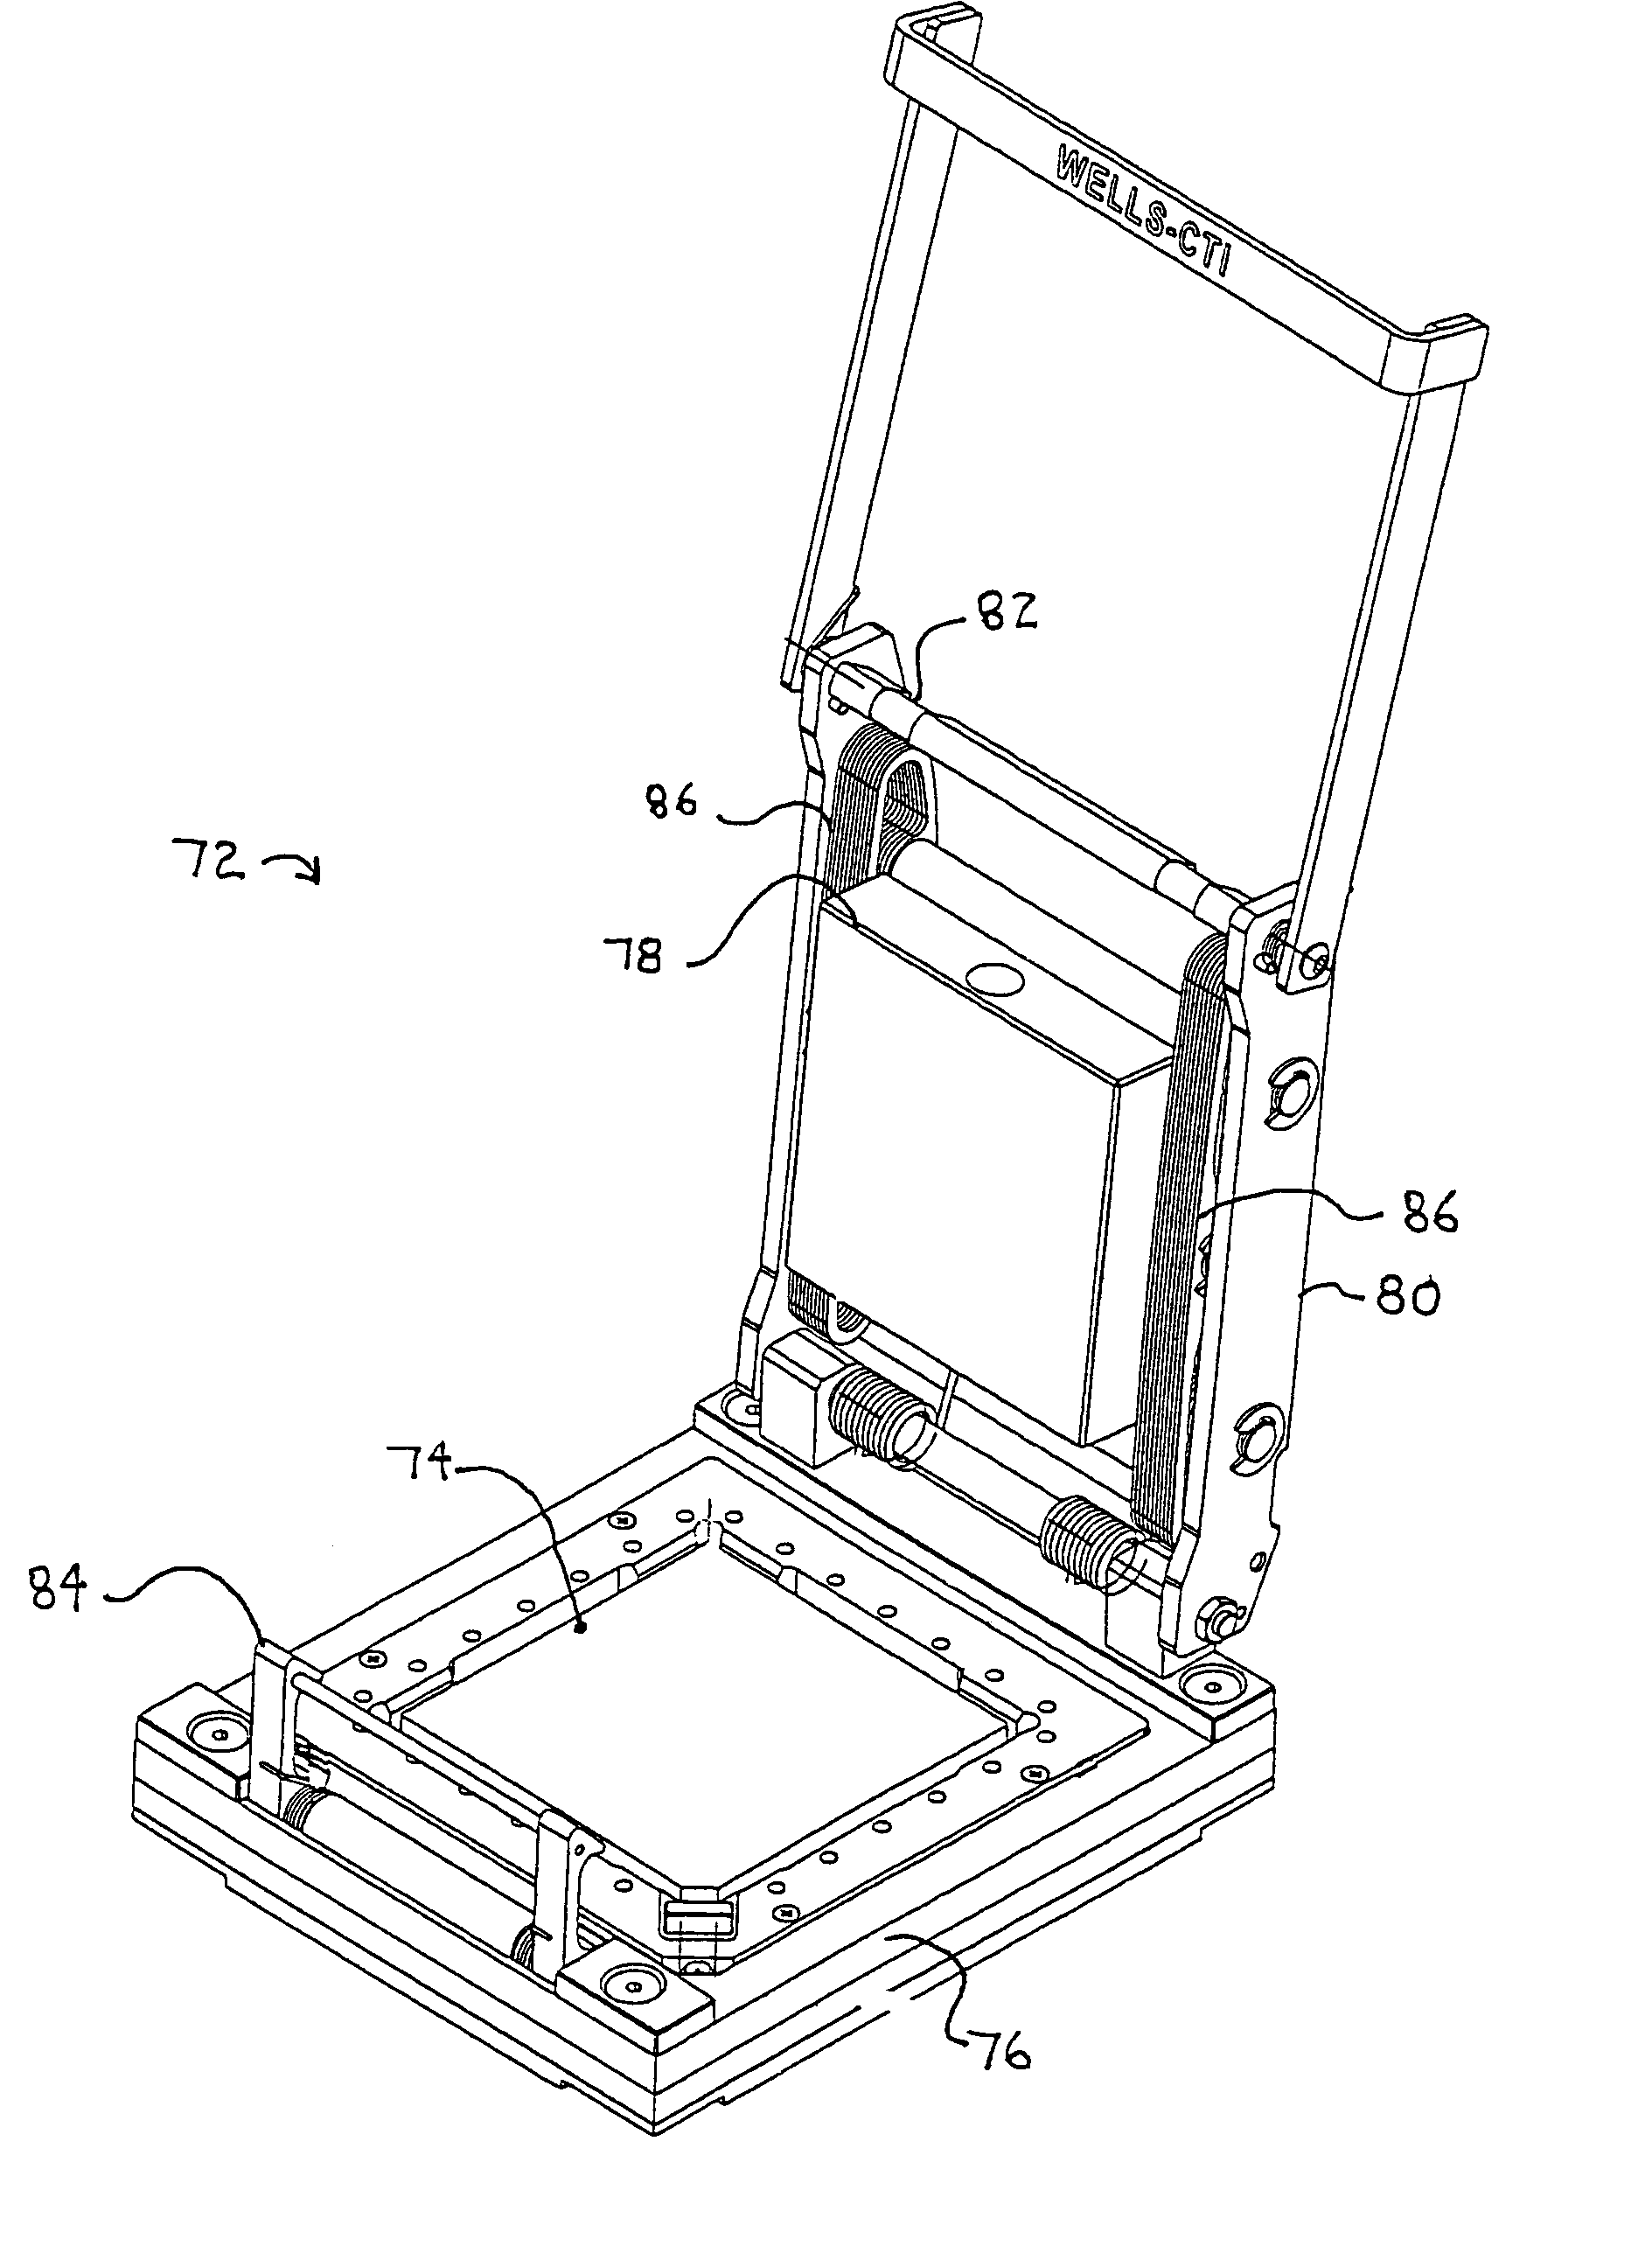 Method and device with variable resilience springs for testing integrated circuit packages